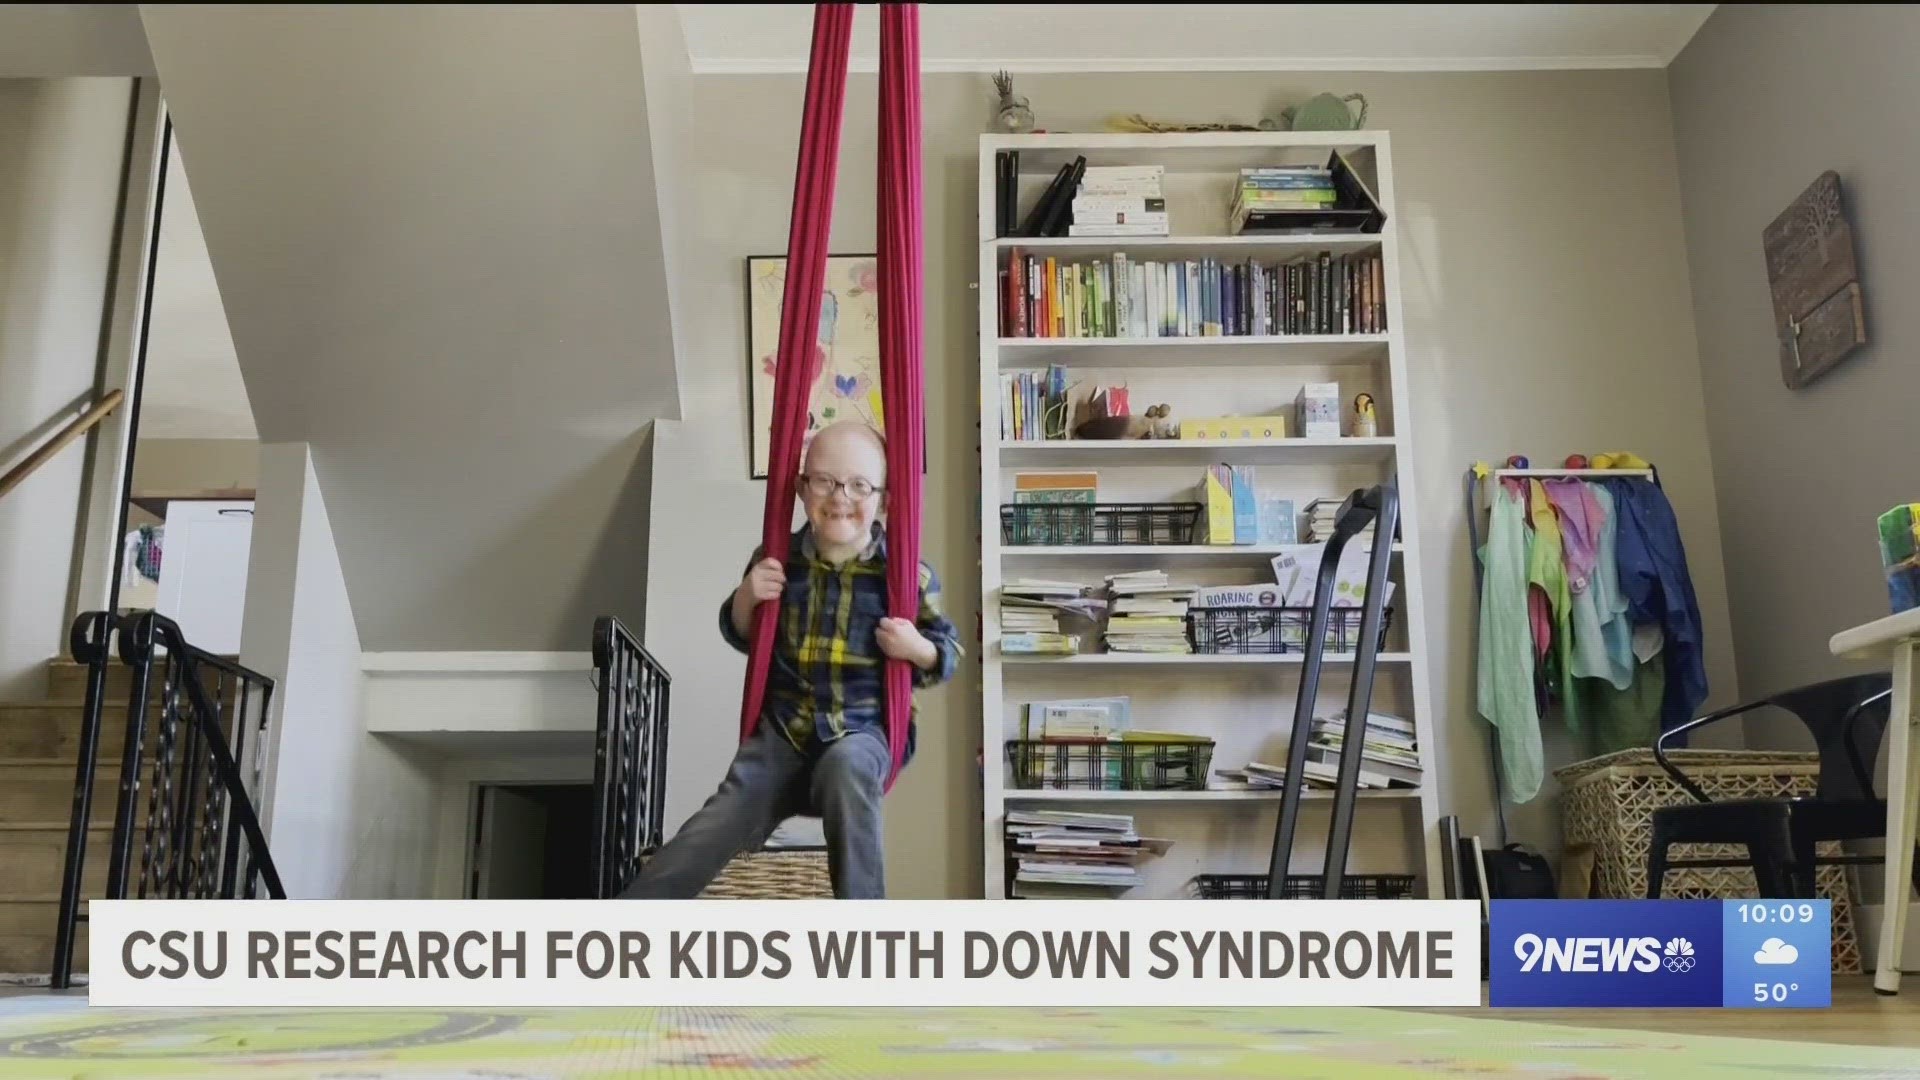 A $6.2 million study is involving kids with Down syndrome across multiple states to find the right interventions to set them up for success in preschool and beyond.